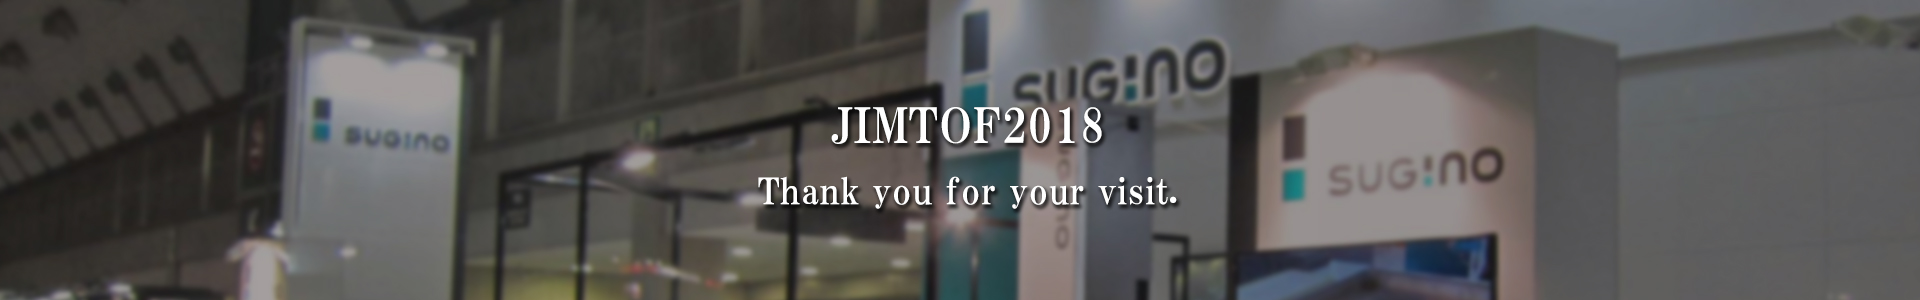 We are going to take part in“ JIMTOF 2018”which will be held at Tokyo Big Sight. In this exhibition, we will introduce various products and recently developed technologies that could be of great benefit to your company. Thank you for your attention, we are looking forward to seeing you at our booth.